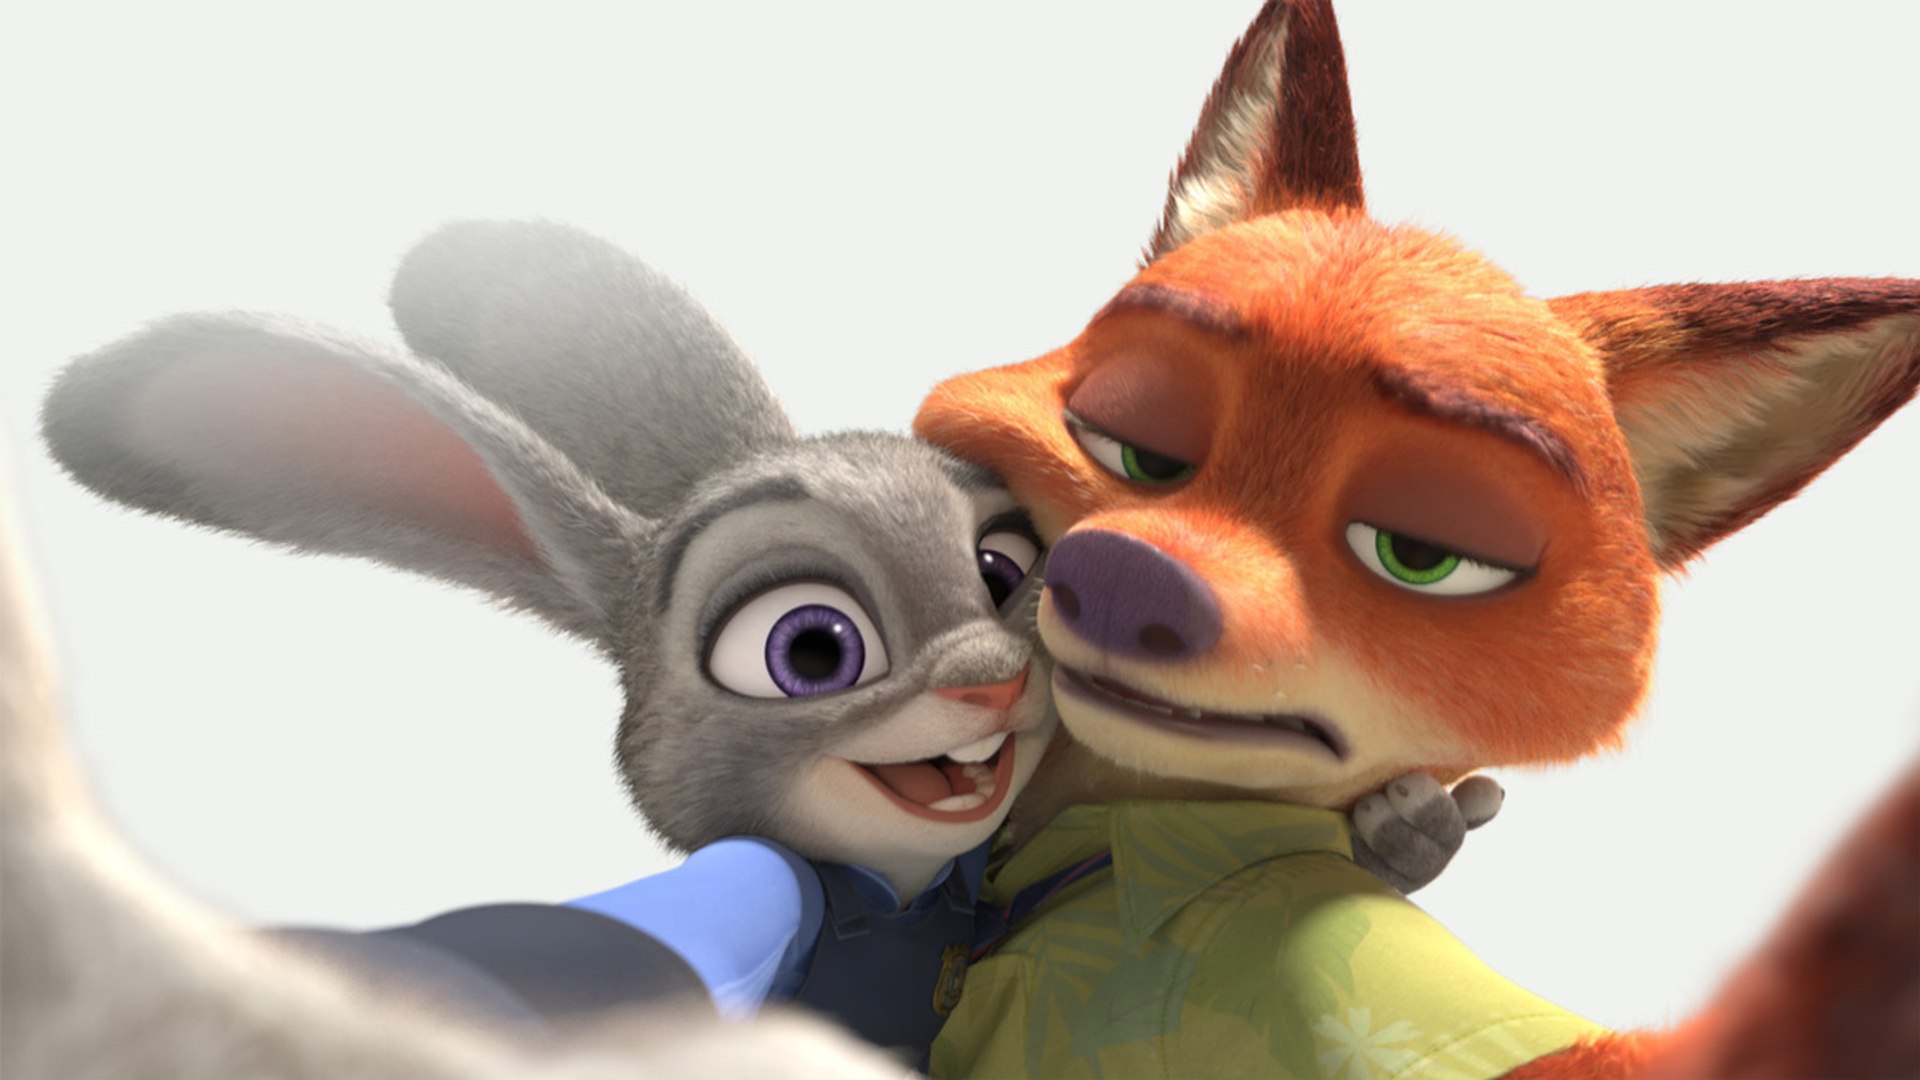 Zootopia Official Trailer 2 - video Dailymotion